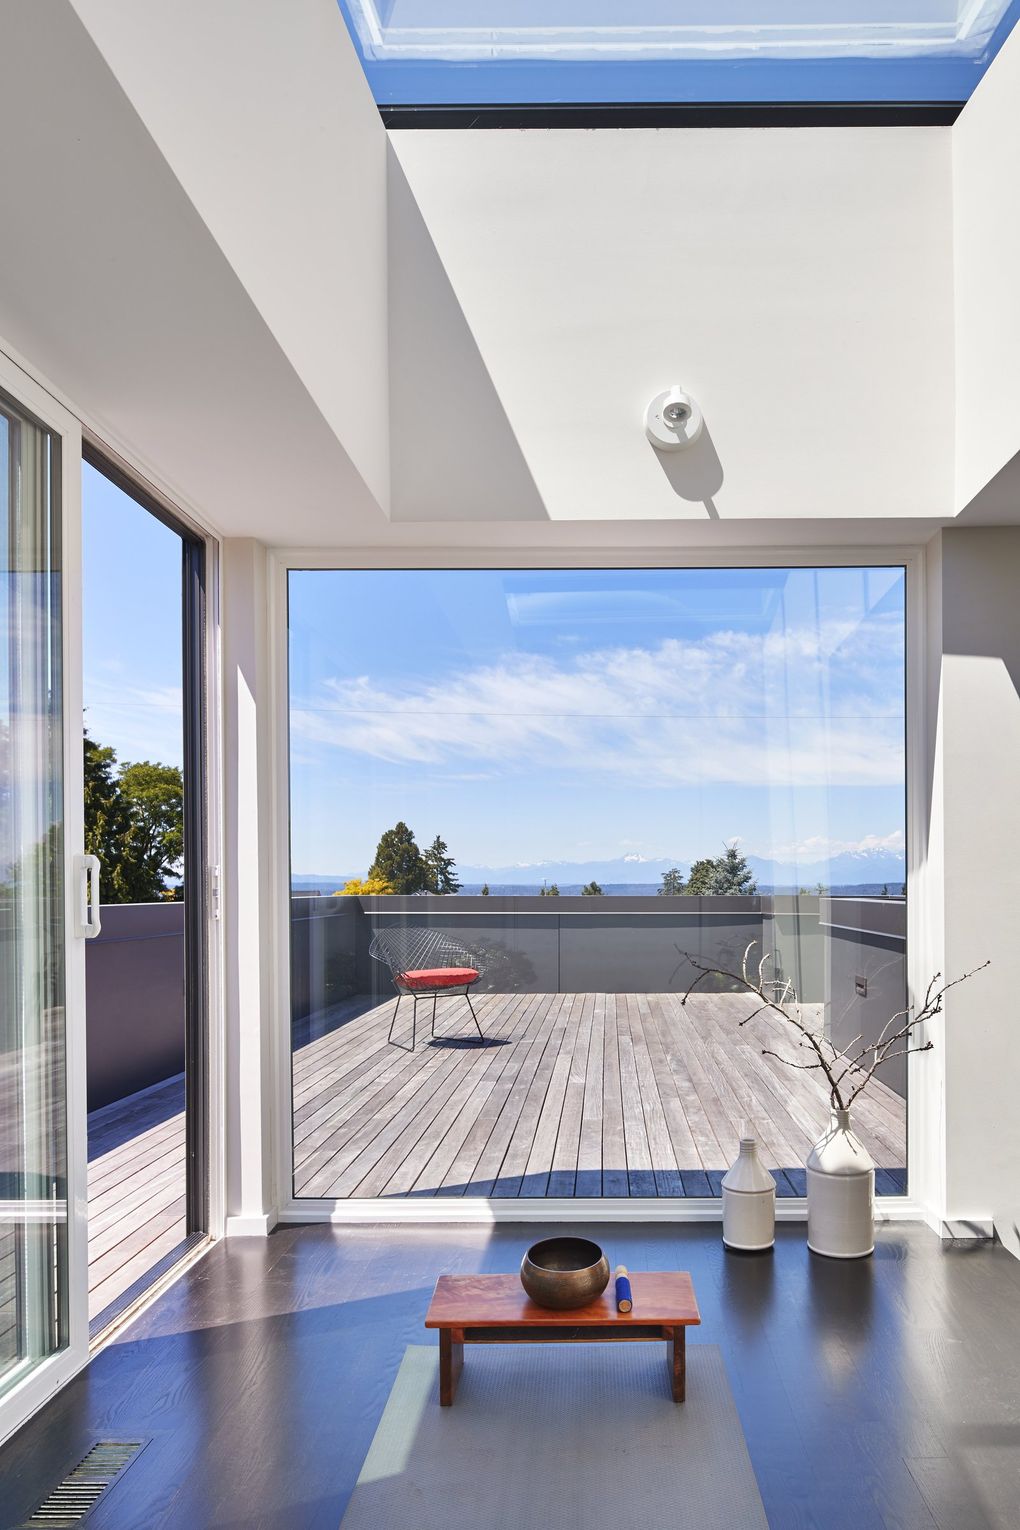 Up on the rooftop of this modern home in Magnolia designed by Jill Rerucha of ReruchaStudio (the builder was Mint Build), a super-roomy yoga studio pops up atop a view-perfect deck. (Benjamin Benschneider / The Seattle Times, 2016)